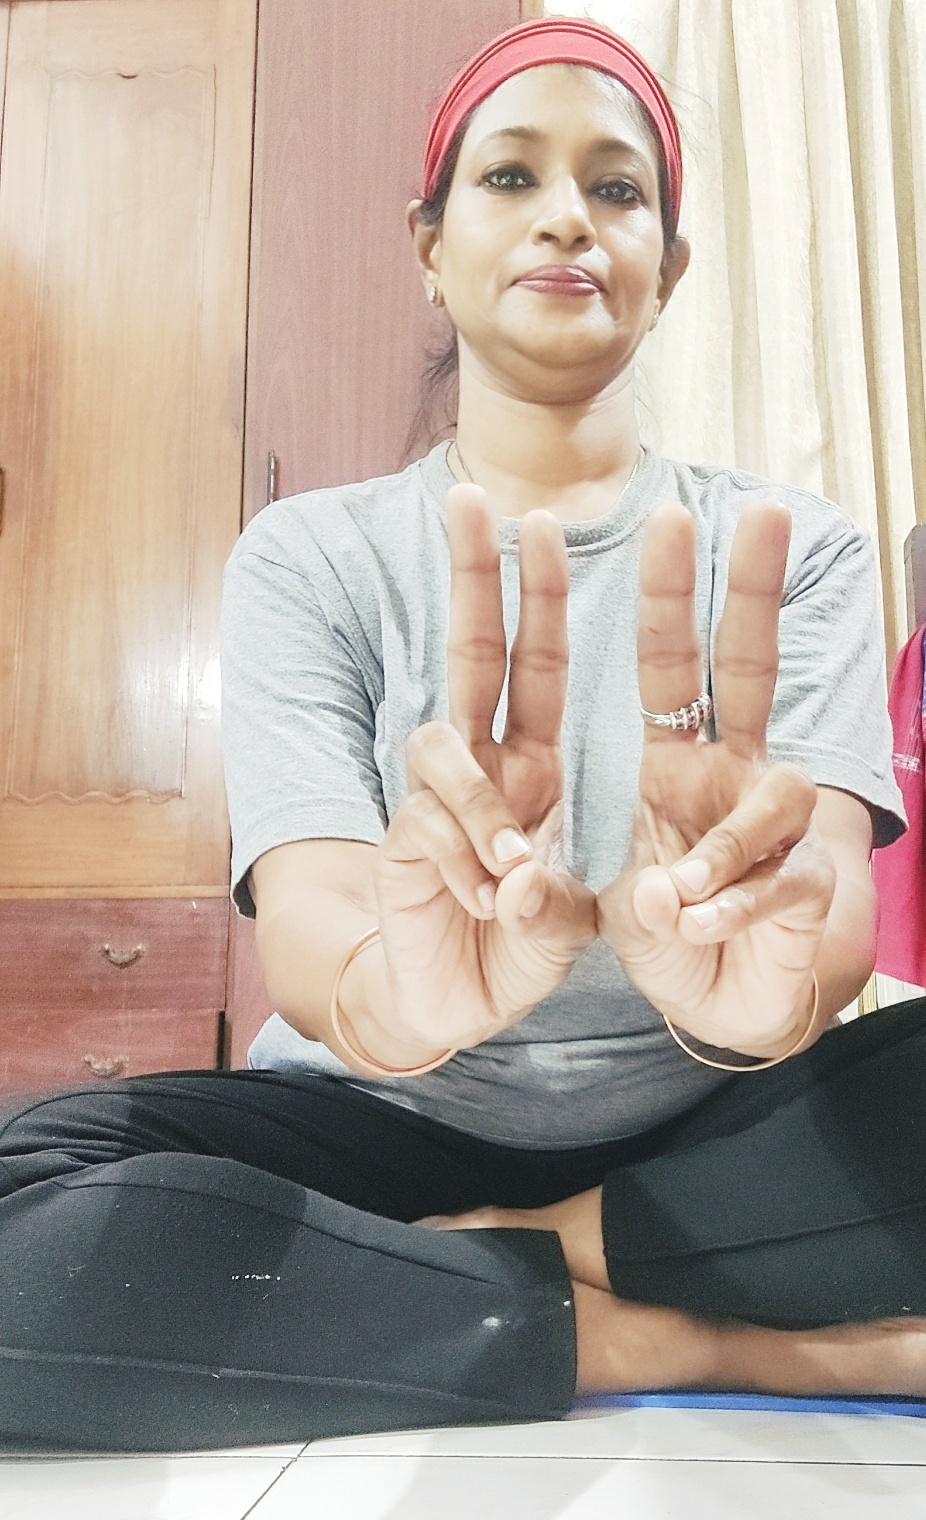 The Prana mudra is one of the most important mudras. One of the best mudras for seniors and for anti-aging, this mudra connects the heart and soul and helps energy and life force flow throughout the body. 